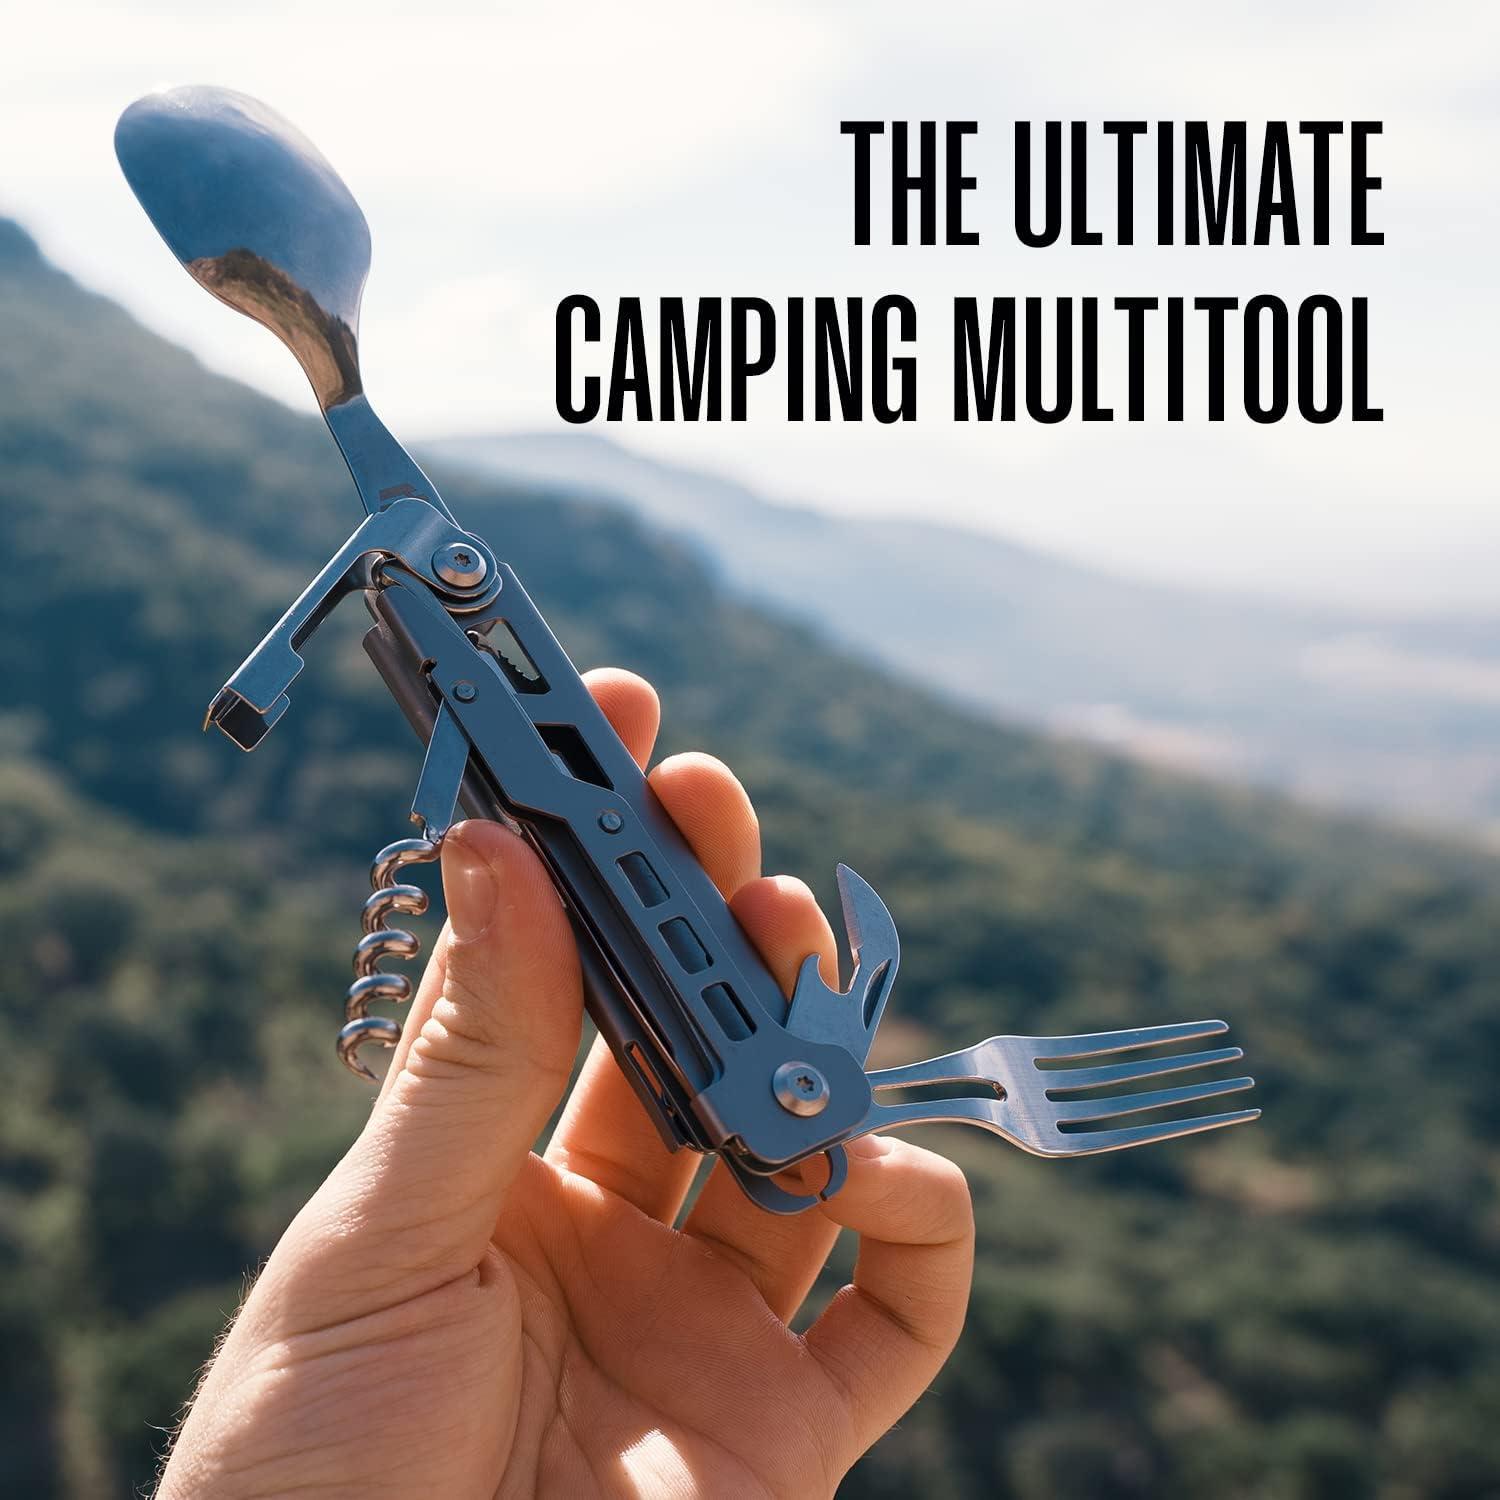 7 New Camping Gadgets to Make Outdoors Fun